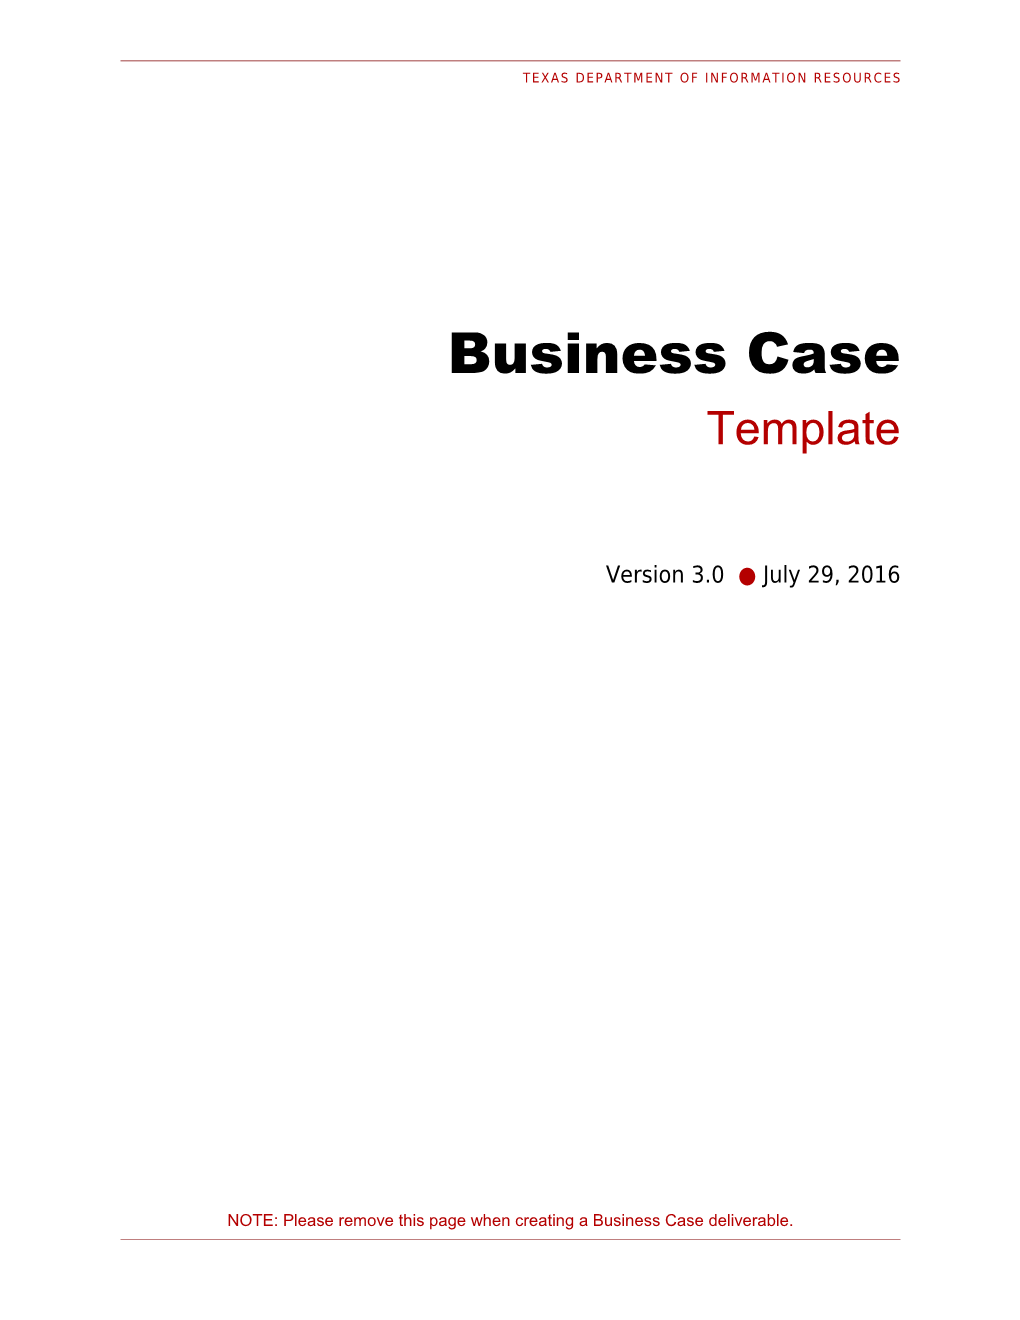 New Business Case Template